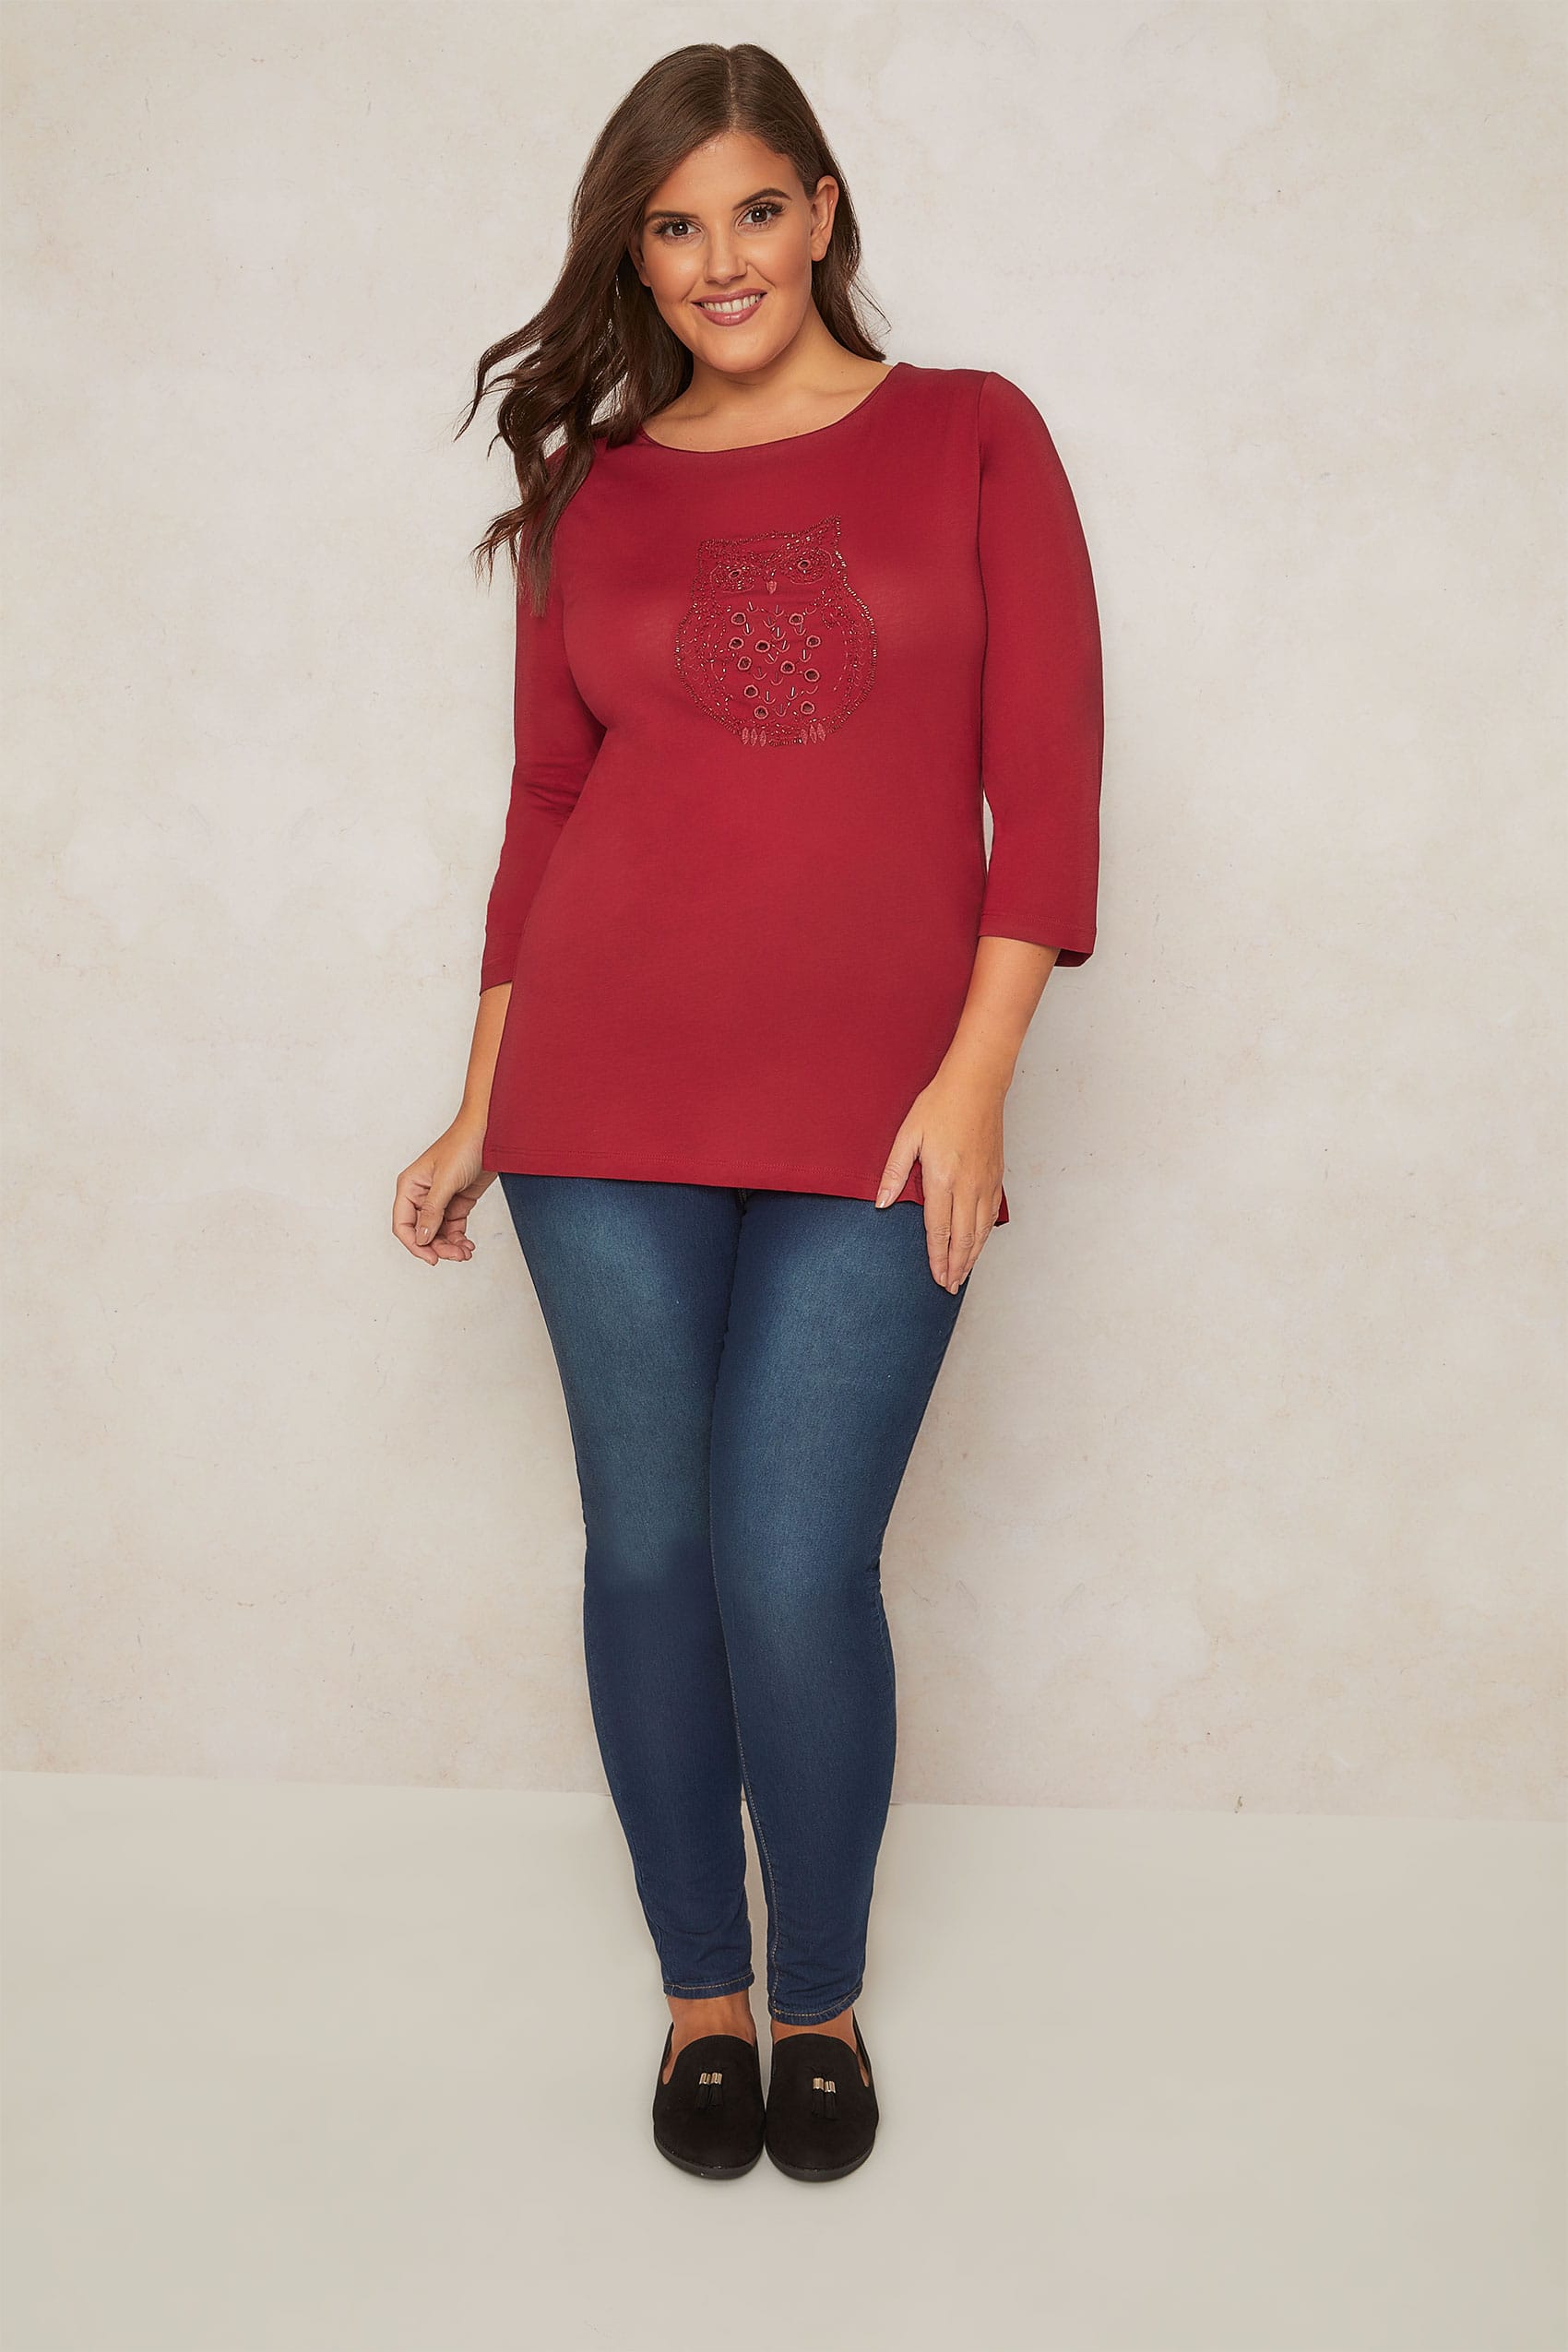 PAPRIKA Red Top With Beaded Owl Figure & 3/4 Length Sleeves, Plus size ...